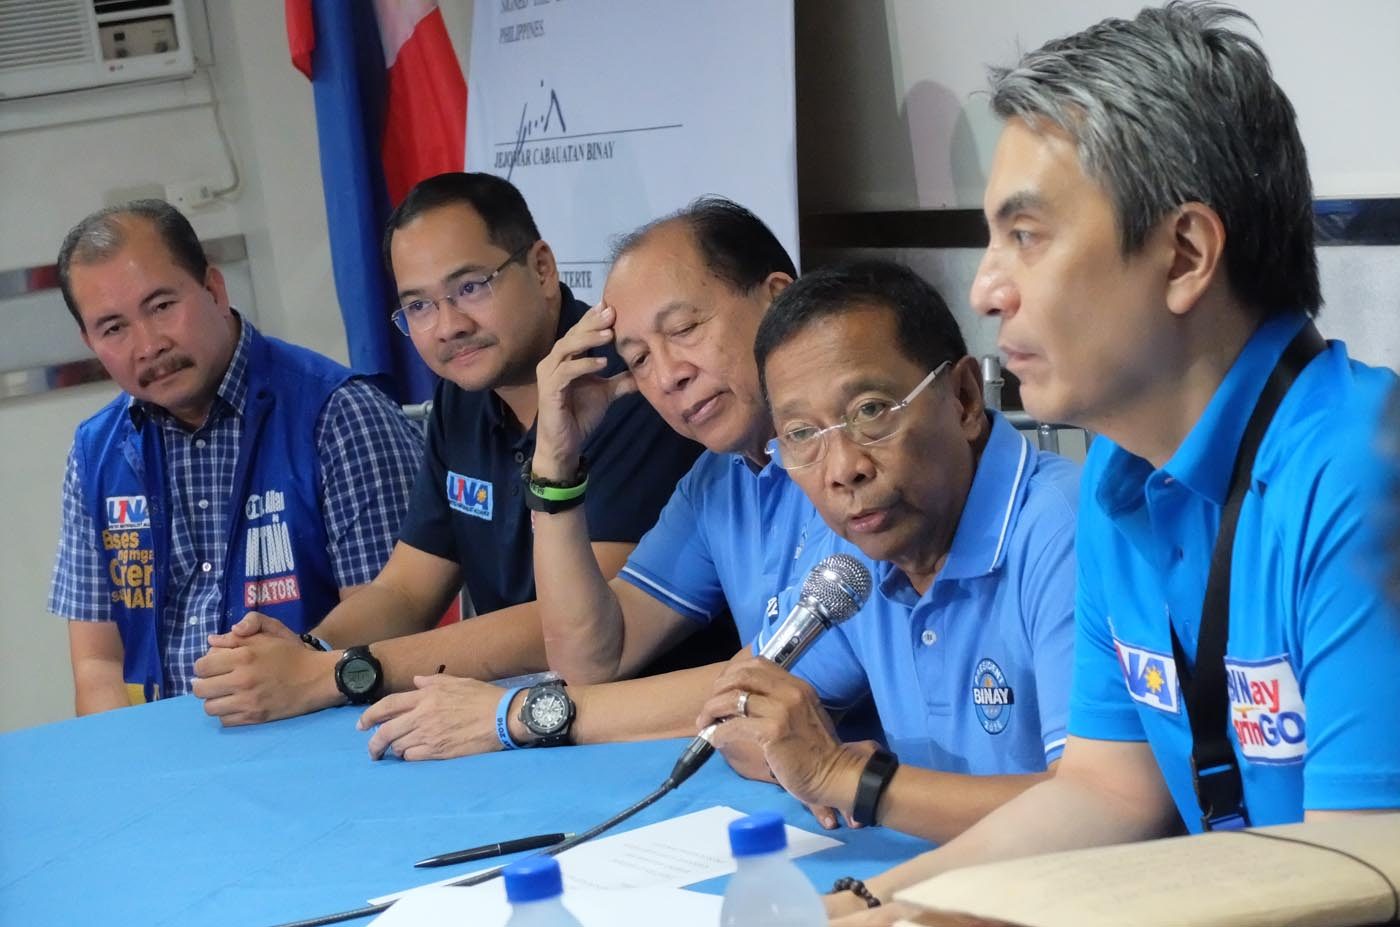 CLOSE ALLIES. Binay is joined by labor lawyer and UNA Senate bet Allan Montano, his spokesperson lawyer Rico Quicho, former Quezon Representative Danilo Suarez, and Navotas Representative Toby Tiangco, who is also UNA president. Photo by Alecs Ongcal/Rappler 